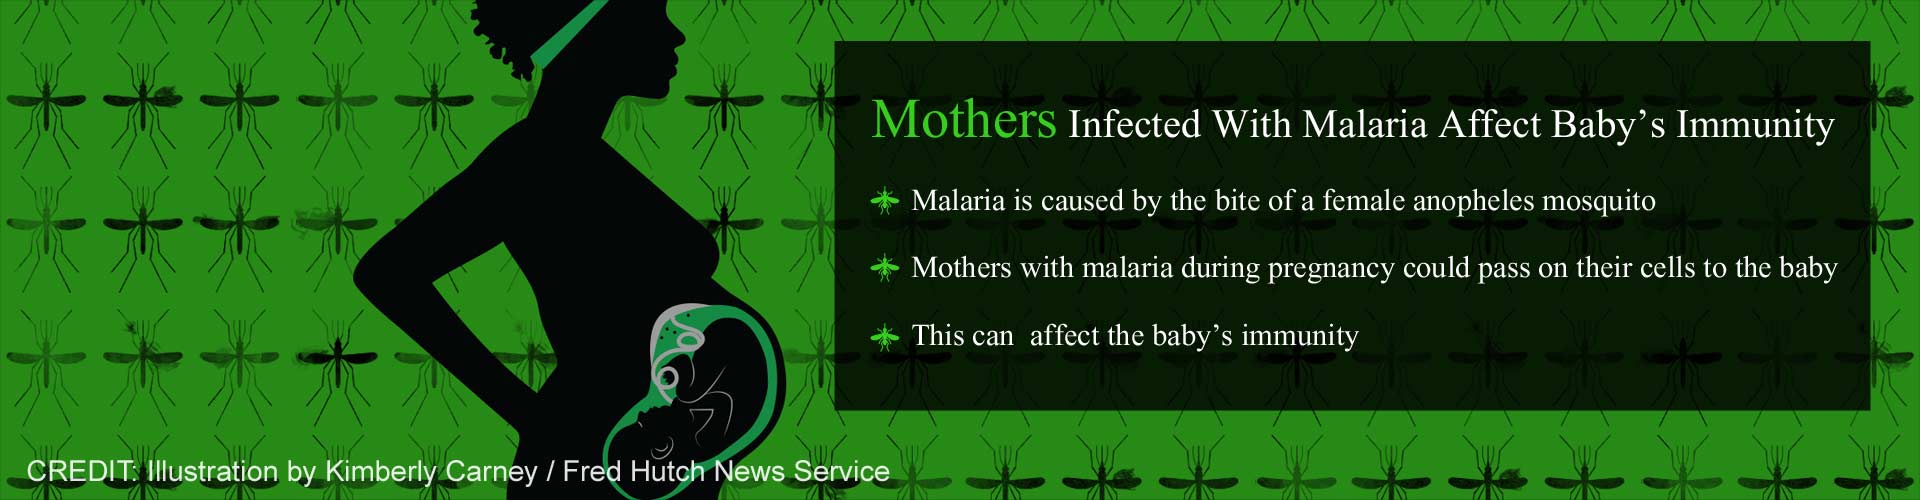 Mothers infected with malaria affect baby's immunity
- Malaria is caused by the bite of a female anopheles mosquito
- Mothers with malaria during pregnancy could pass on their cells to the baby
- This can affect the baby's immunity